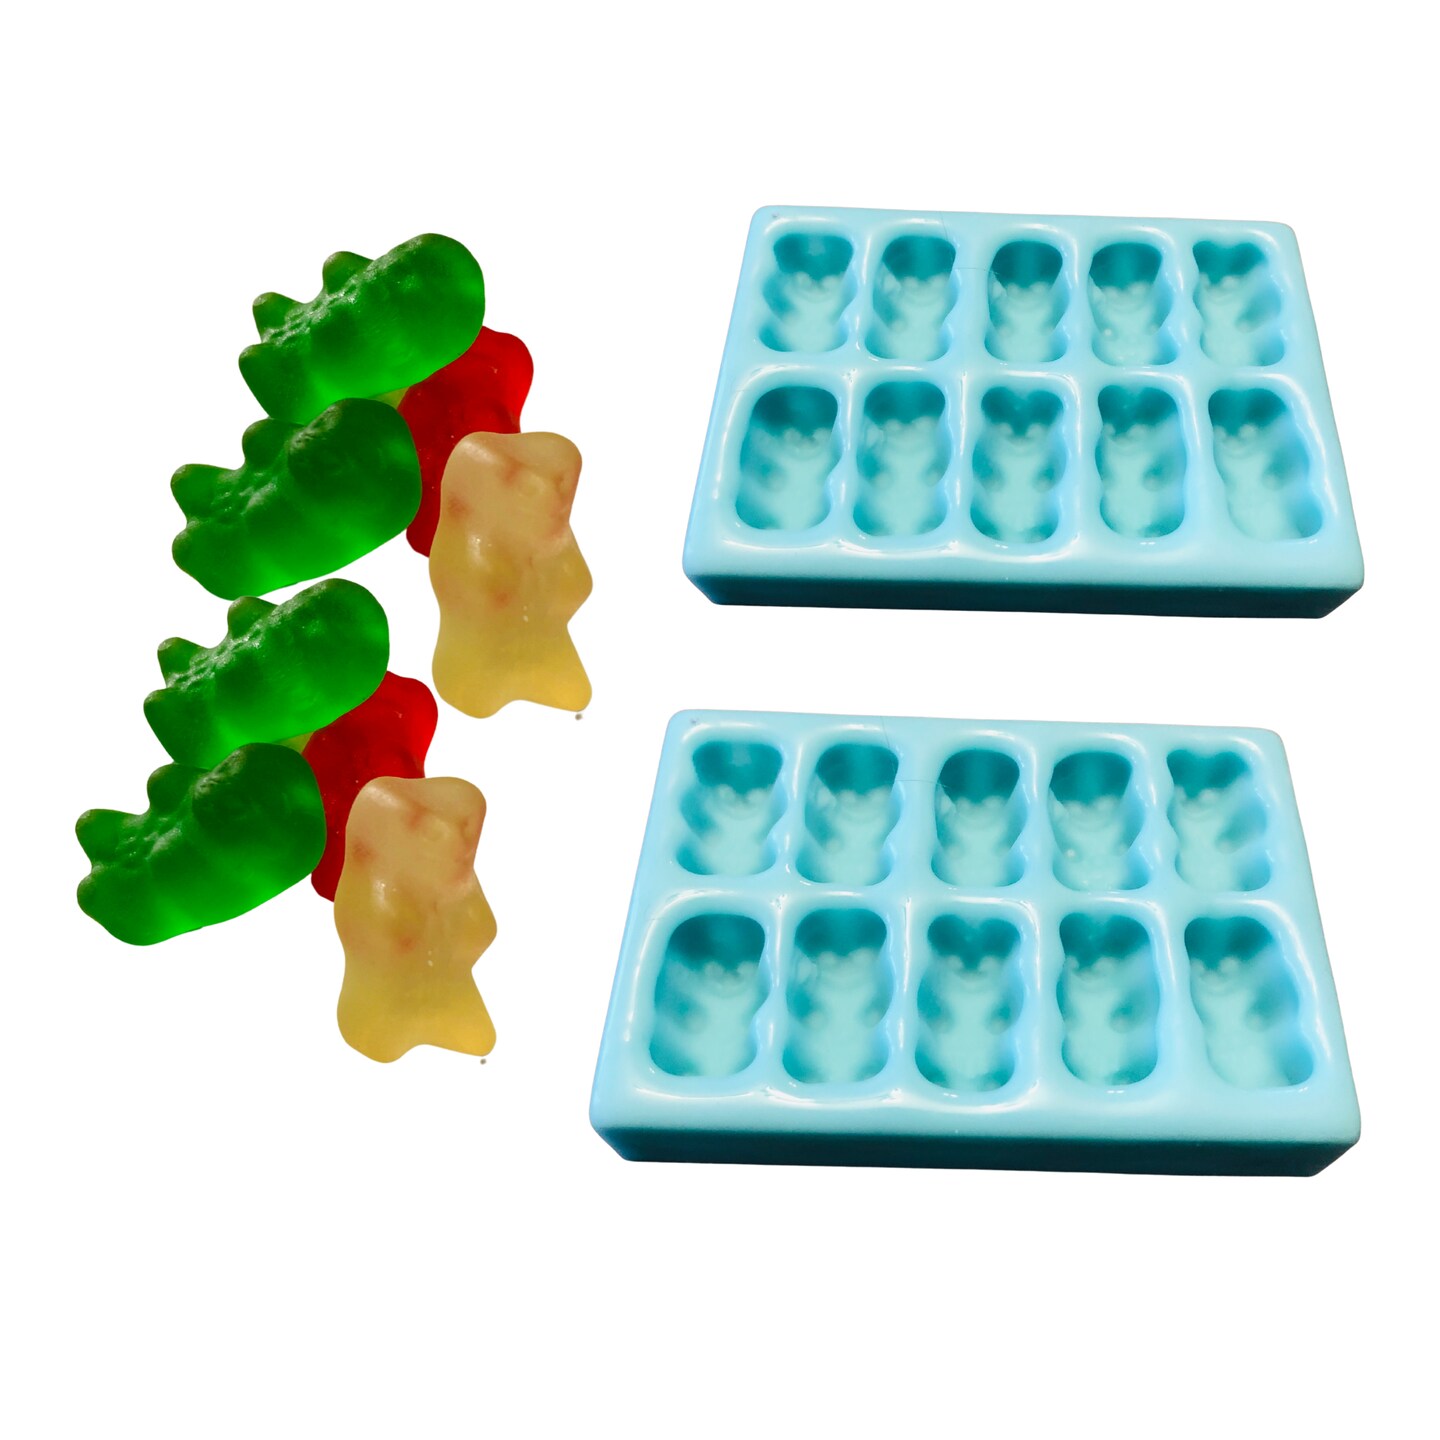 10pc Jelly Bear Shape Silicone Mold| Candy Shaped Silicone Mold| Soap| Candle | Mold for Wax| Mold for Resin| Not Food Grade